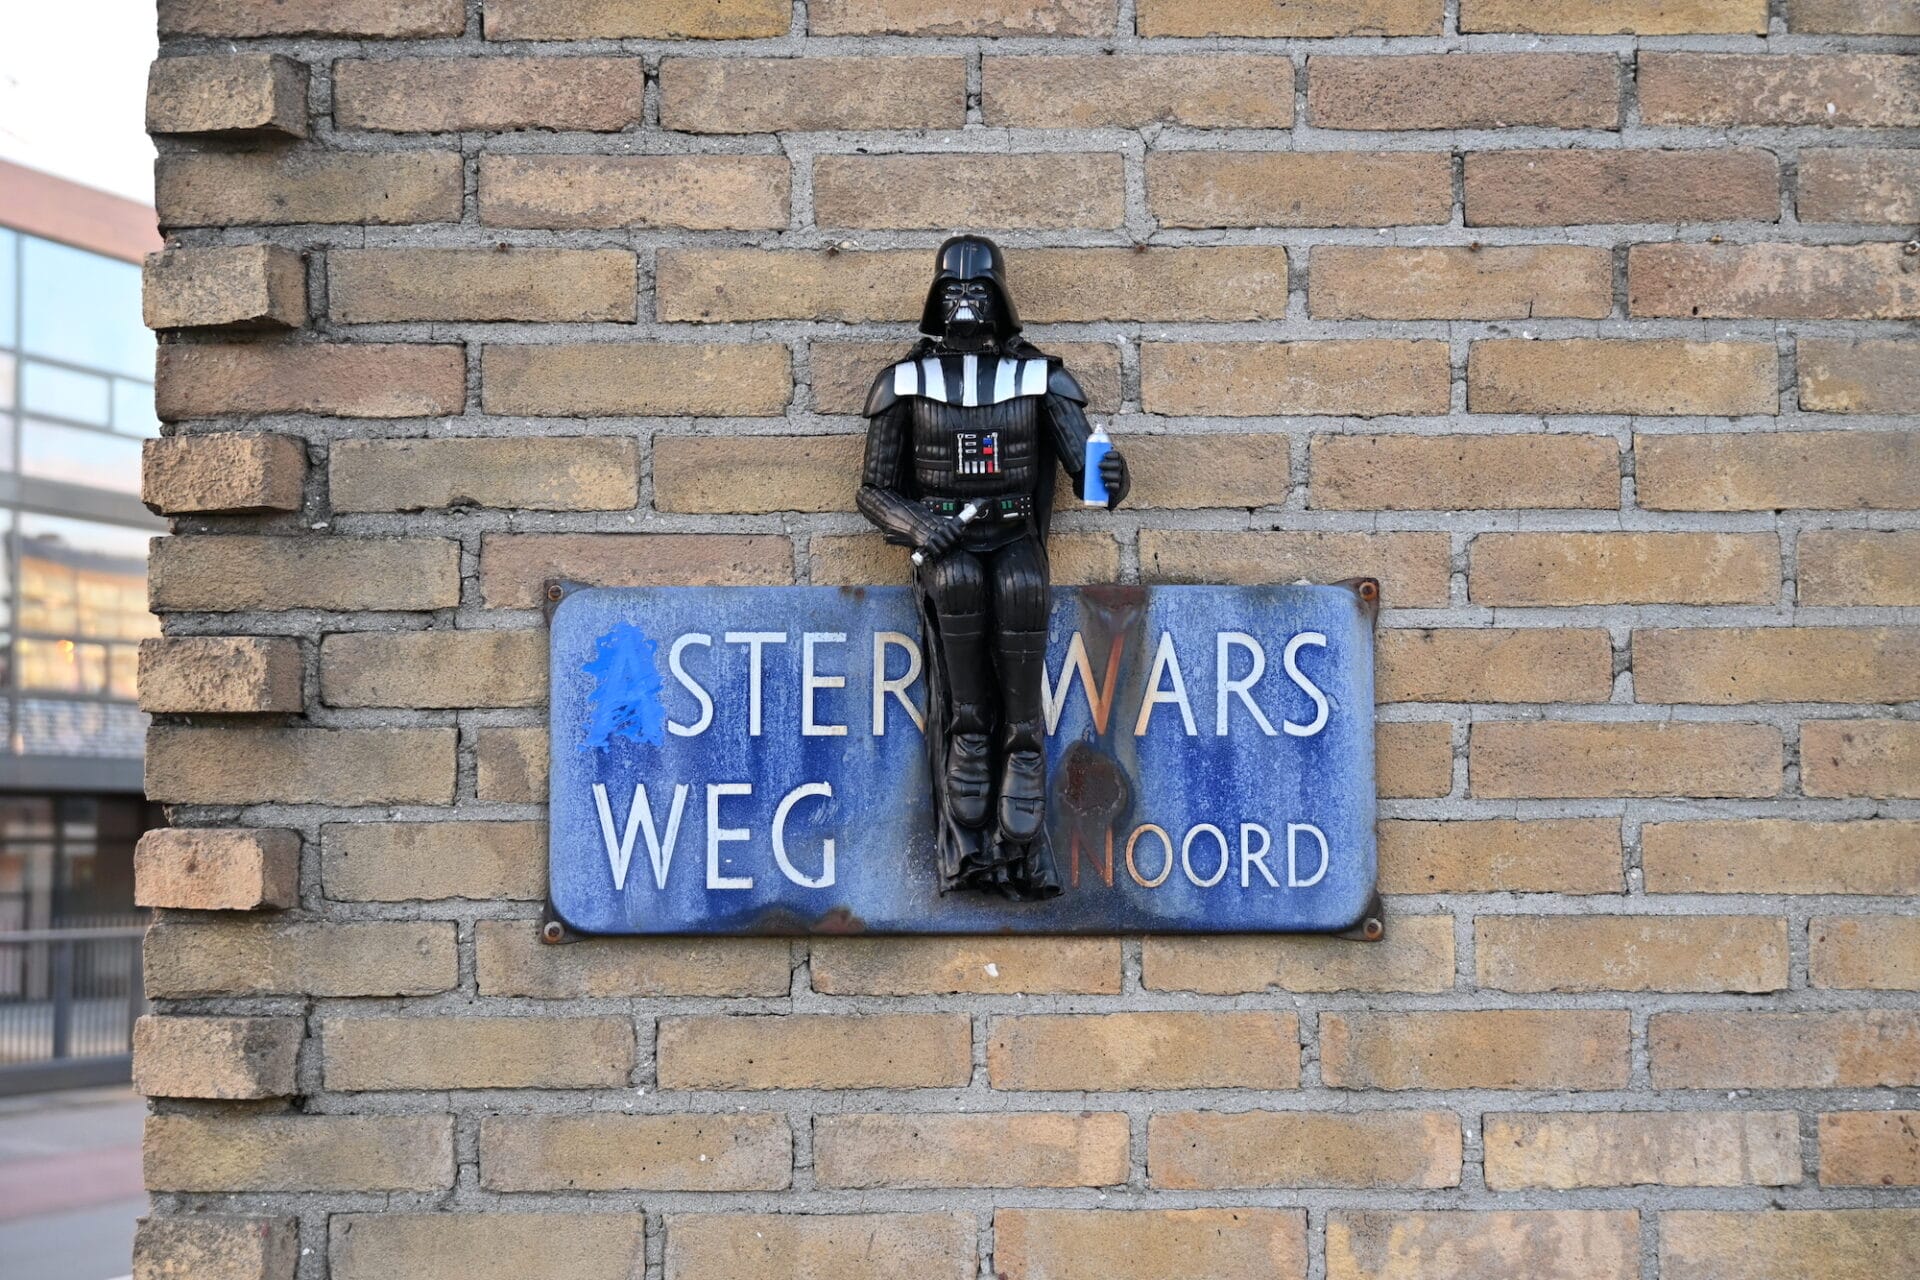 A sculpture of Darth Vader is placed onto a sign that reads 